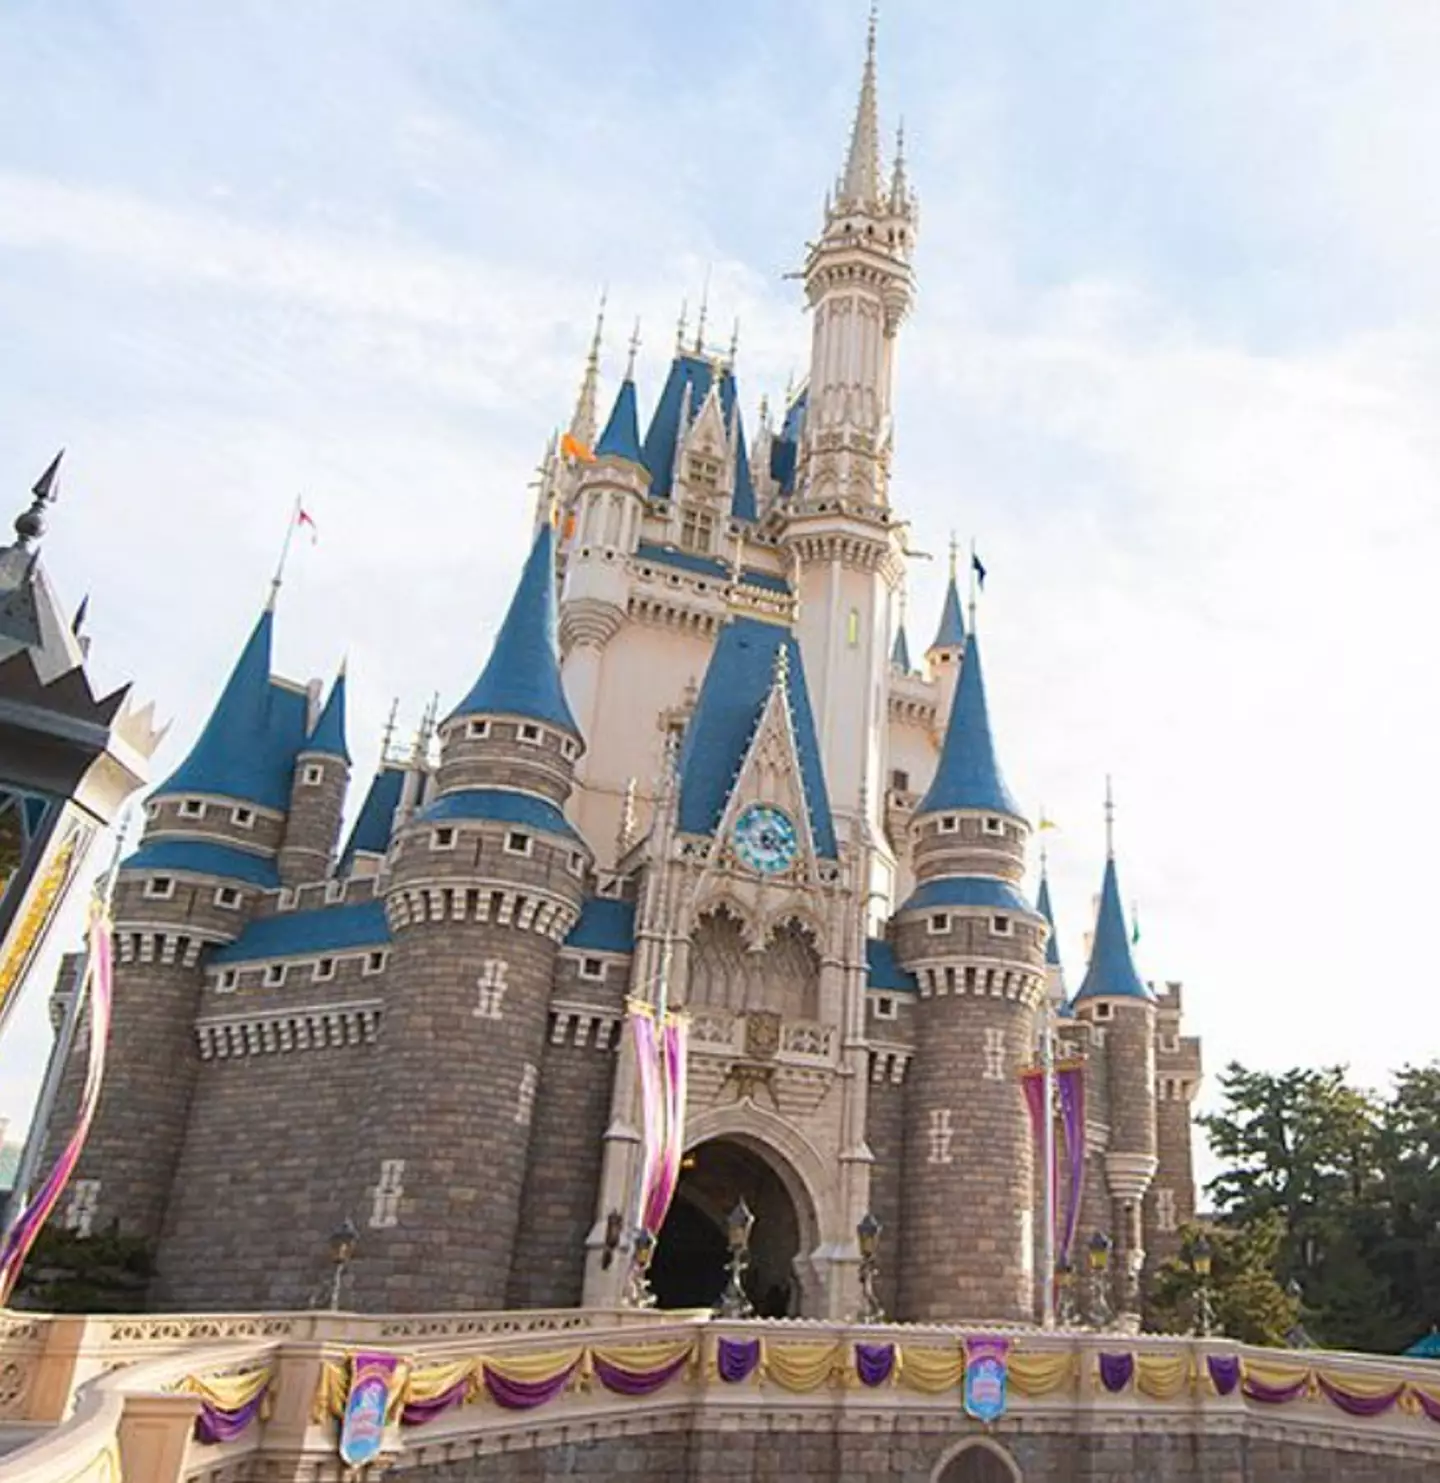 Staff were treated to a three-day excursion at Disneyland in Tokyo.